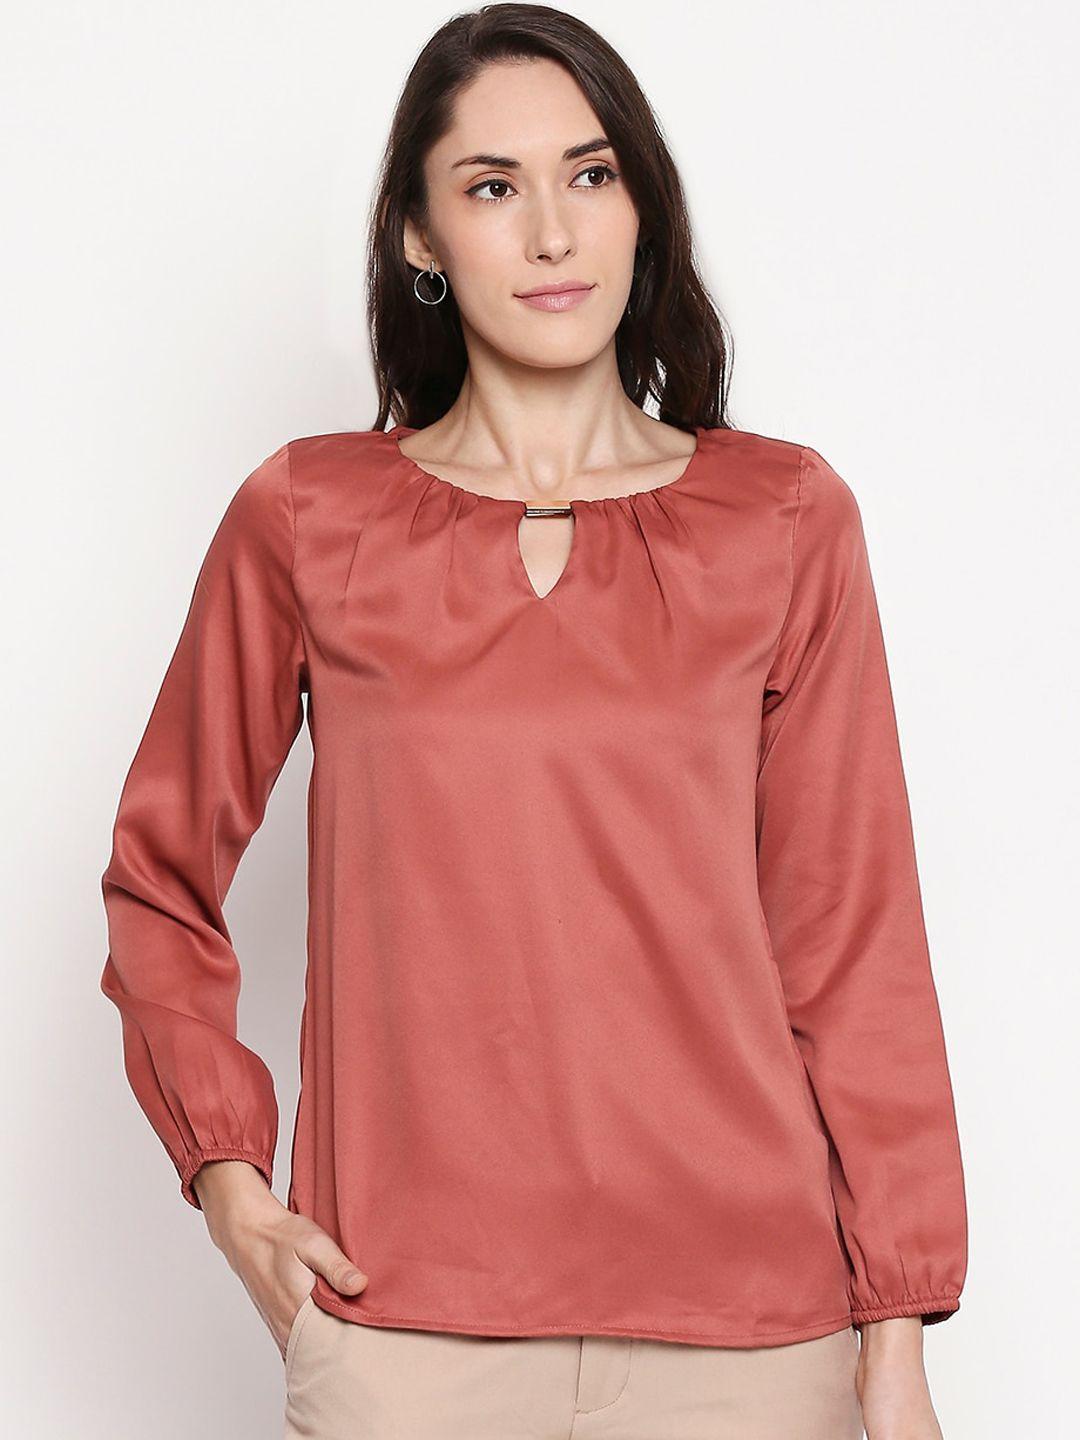 annabelle by pantaloons women rust-coloured solid keyhole neck top